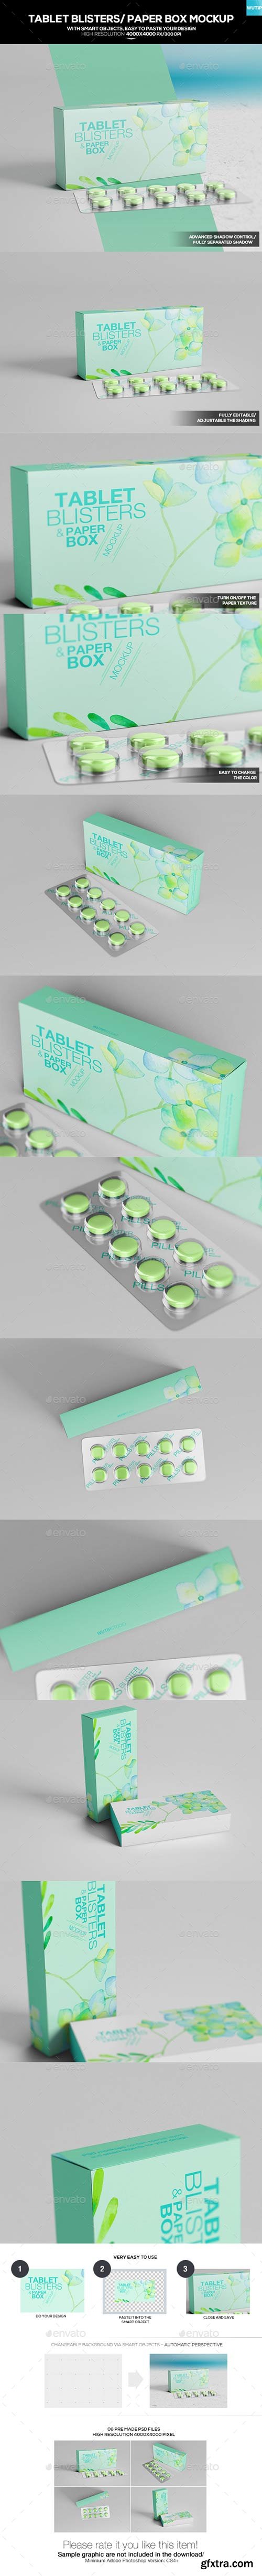 Graphicriver - Tablet Blisters/ Paper Box Mockup 20140915